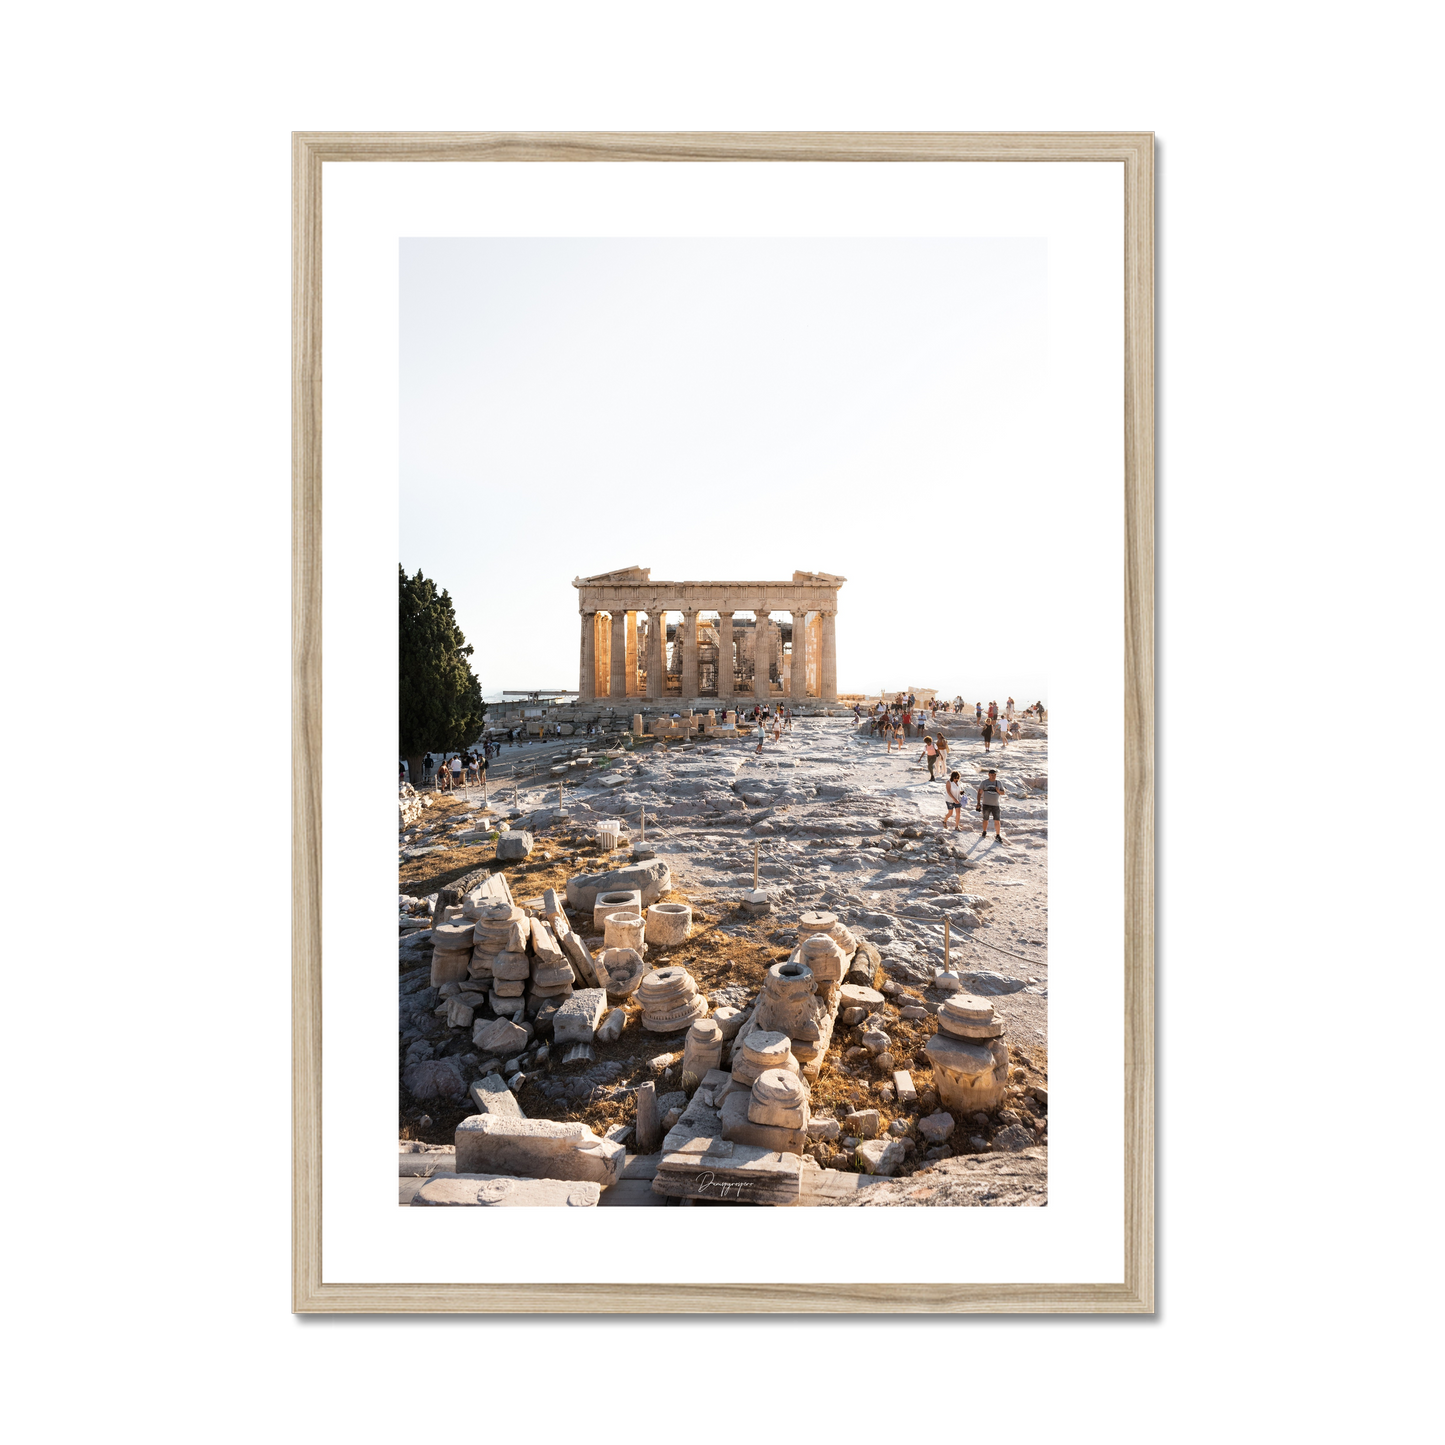 Framed art in a beige wooden frame showing the Parthenon standing behind some ancient ruins on the hill of Acropolis in Athens during a bright warm day